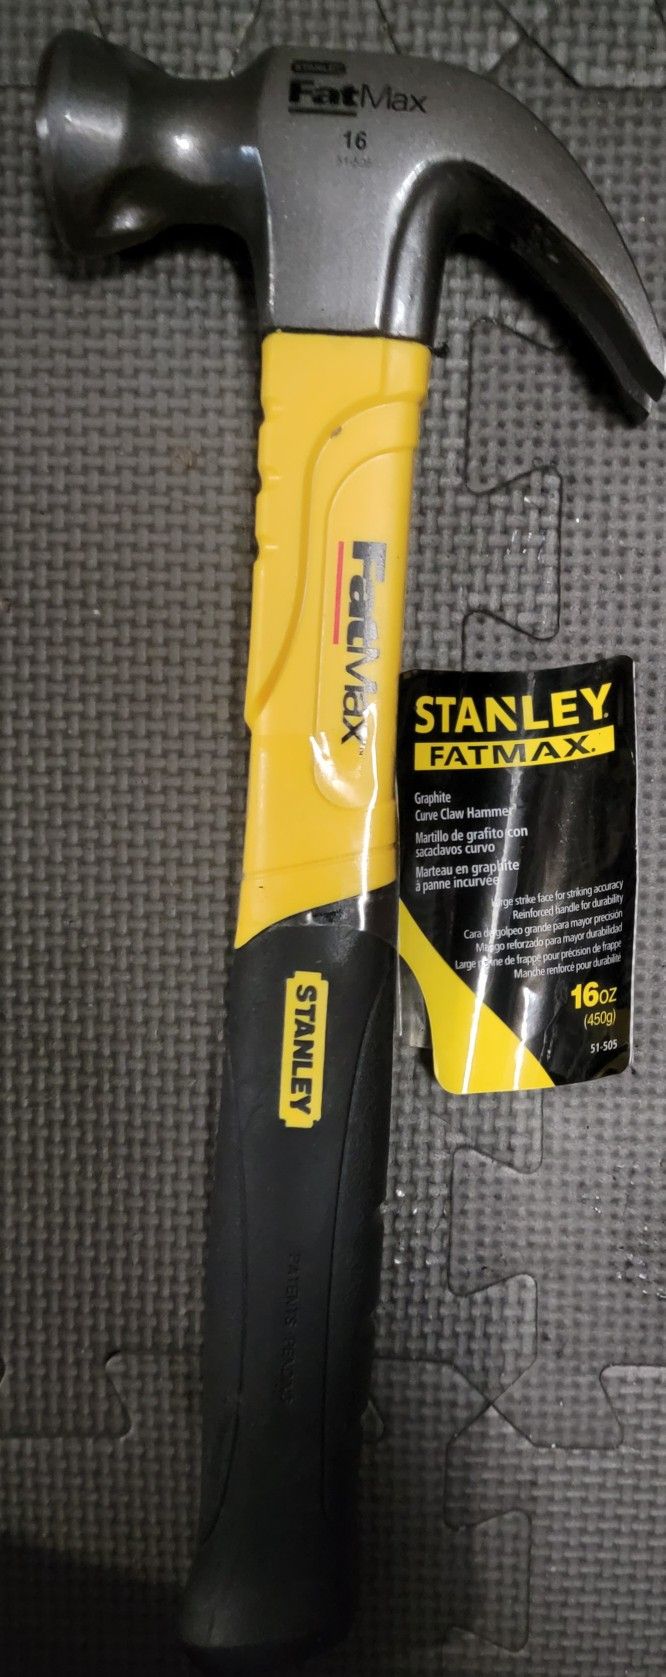 Stanley FatMax 16 Oz. Smooth-Face Curved Claw Hammer with Graphite